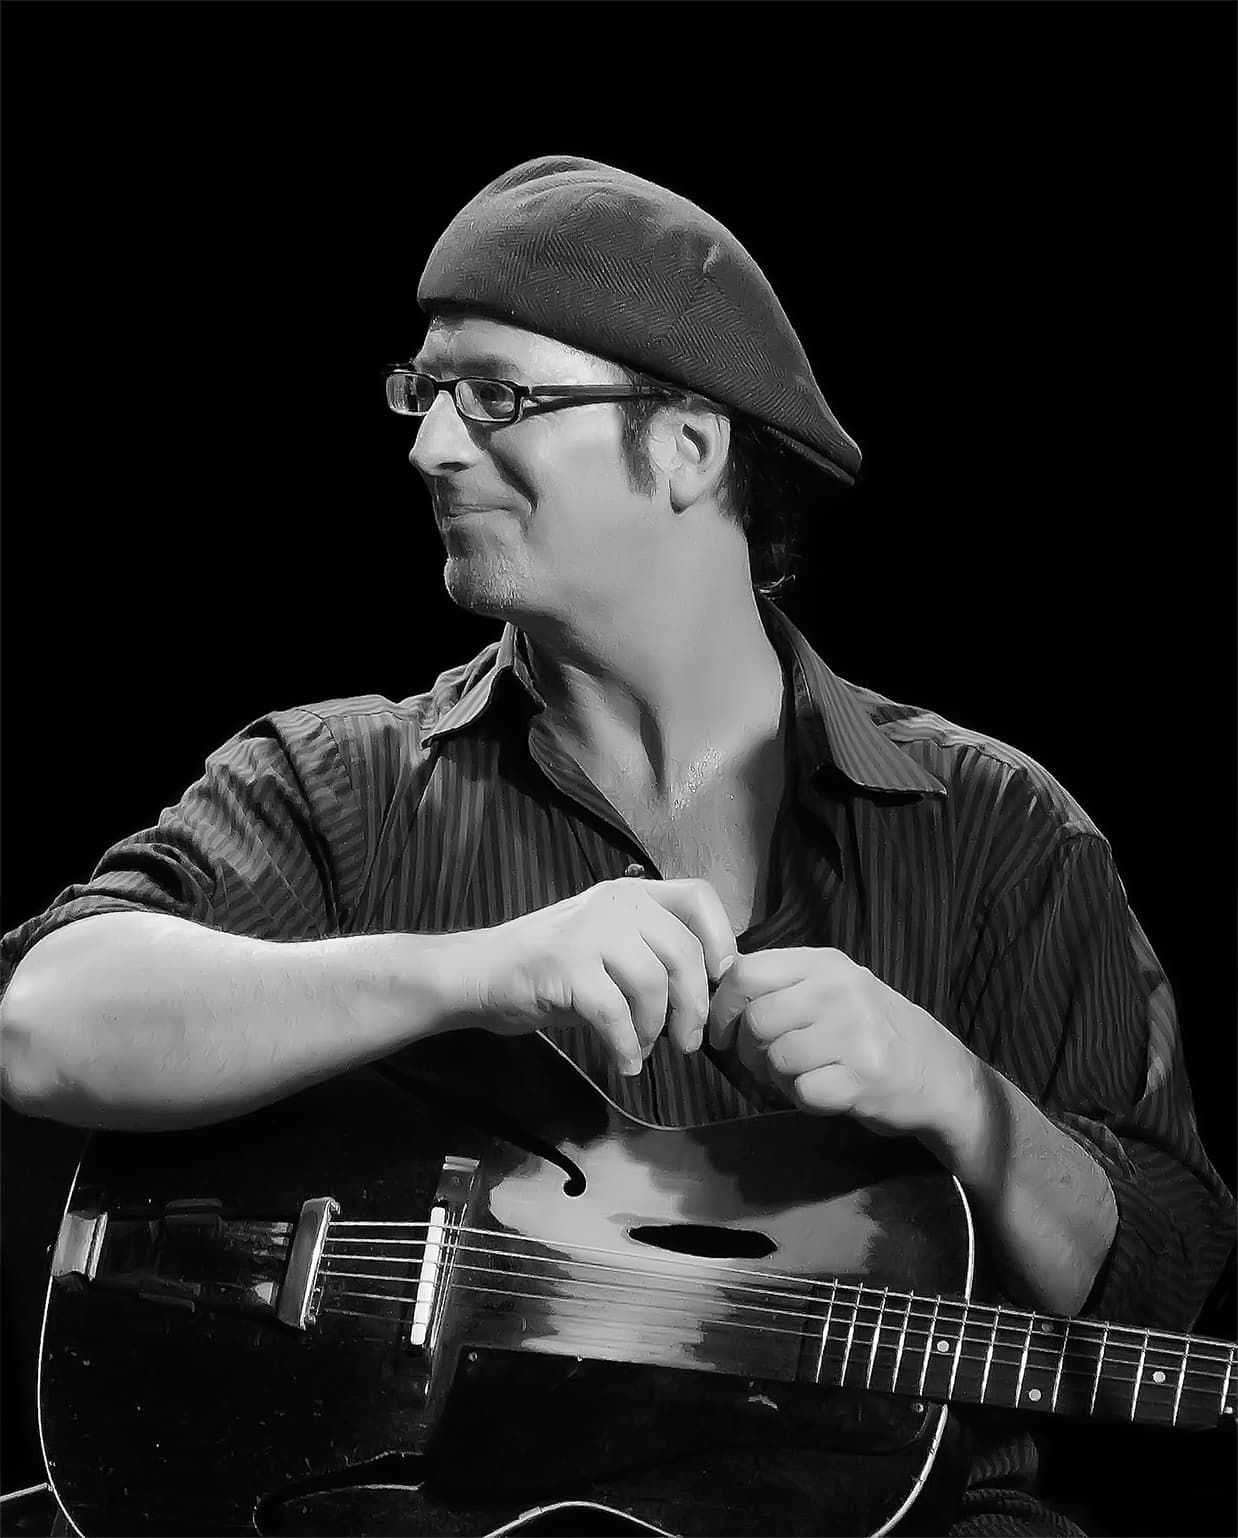 Man smiling to the left, holding a guitar and wearing a cap backwards